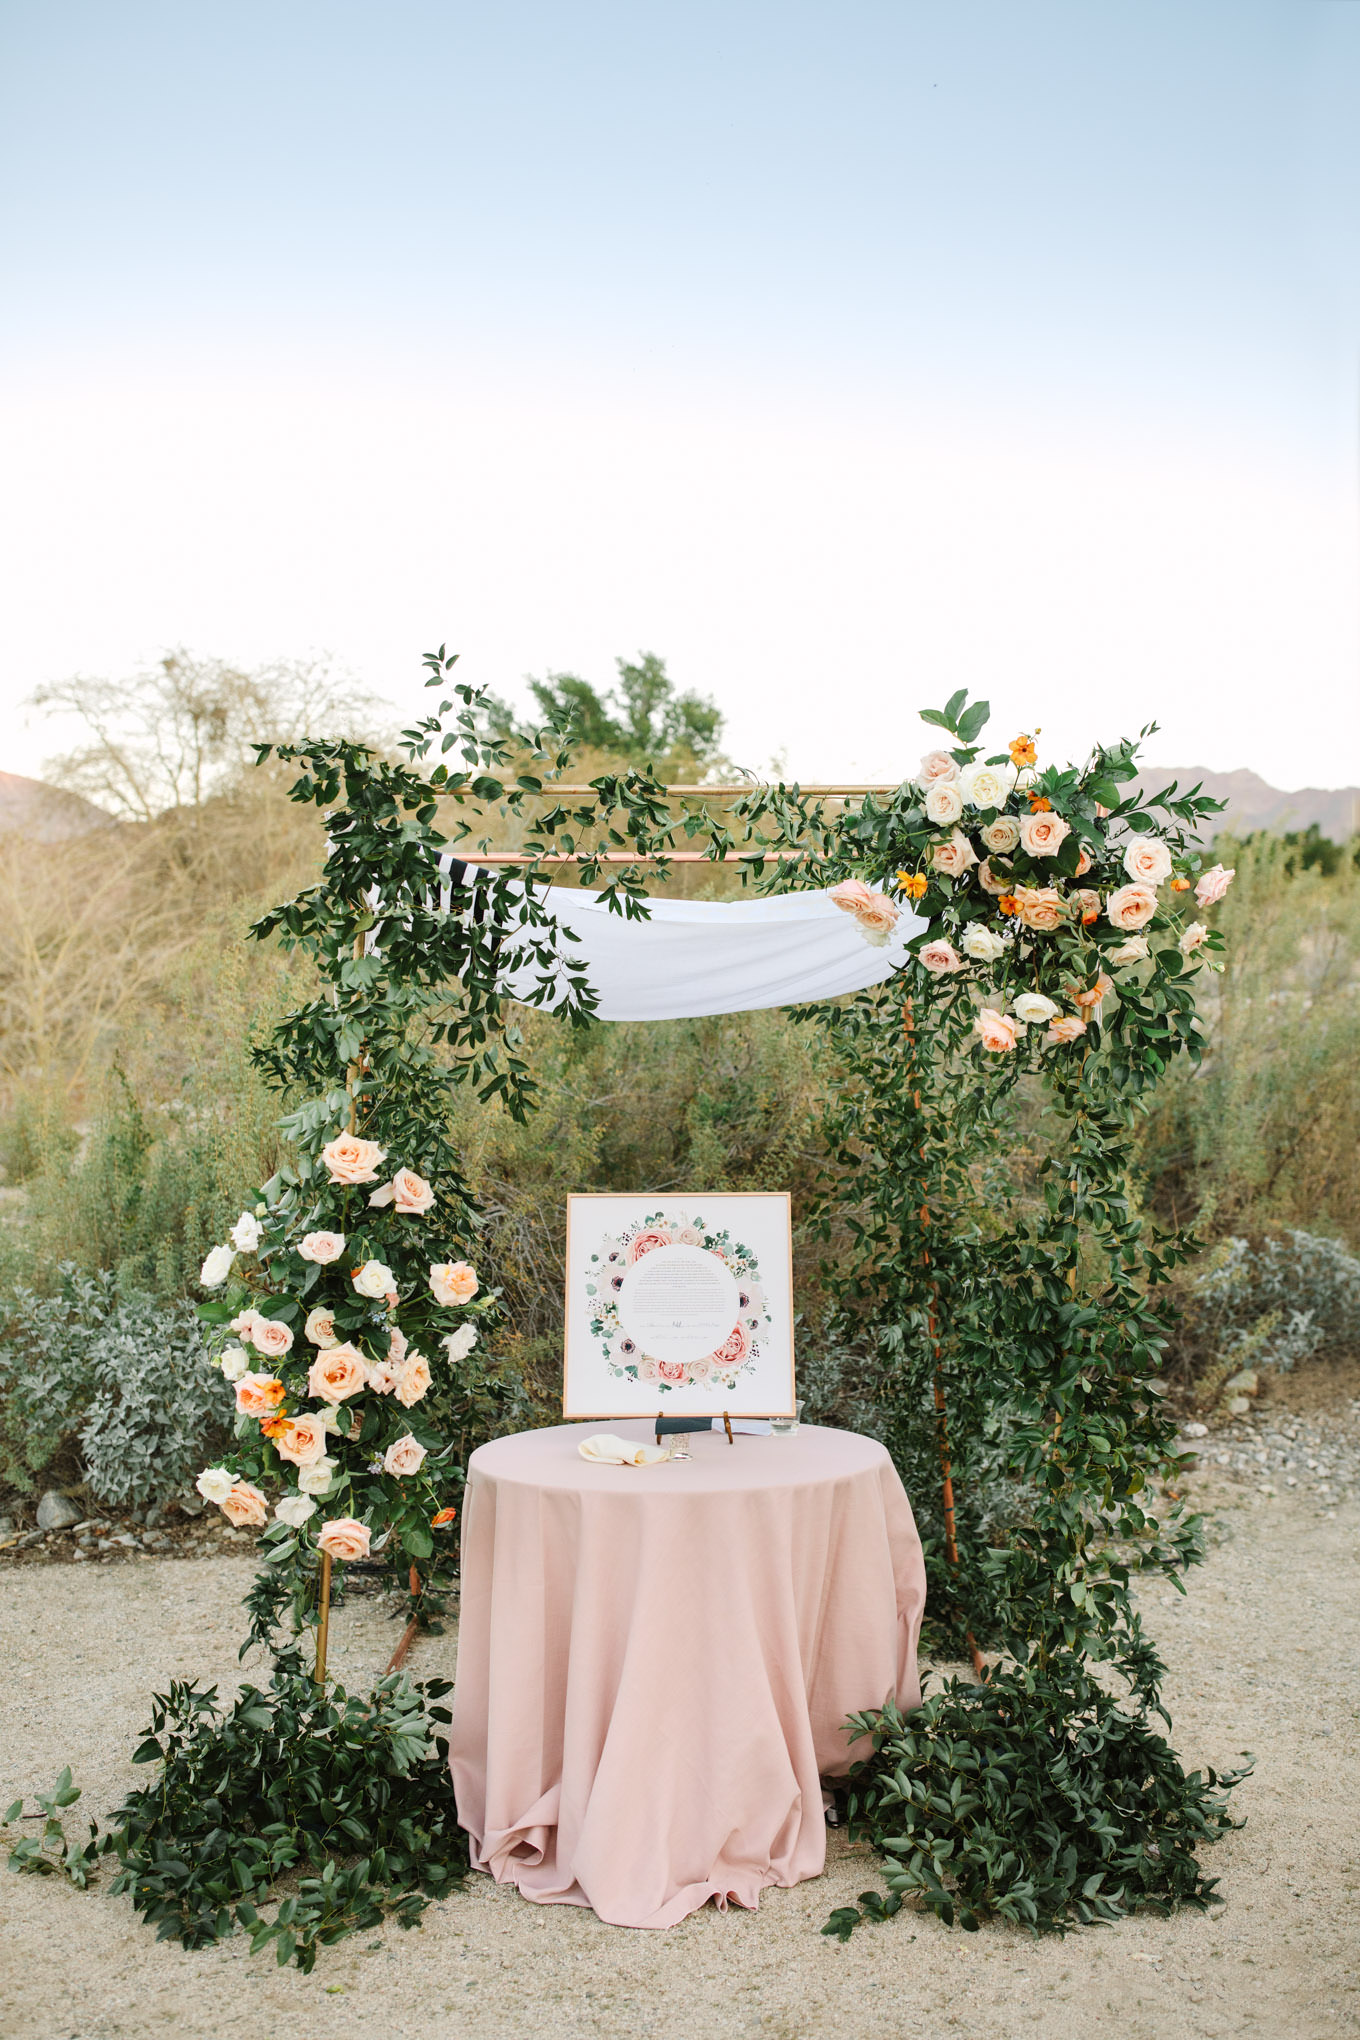 Ketubah and chuppah at wedding ceremony | Living Desert Zoo & Gardens wedding with unique details | Elevated and colorful wedding photography for fun-loving couples in Southern California |  #PalmSprings #palmspringsphotographer #gardenwedding #palmspringswedding  Source: Mary Costa Photography | Los Angeles wedding photographer 